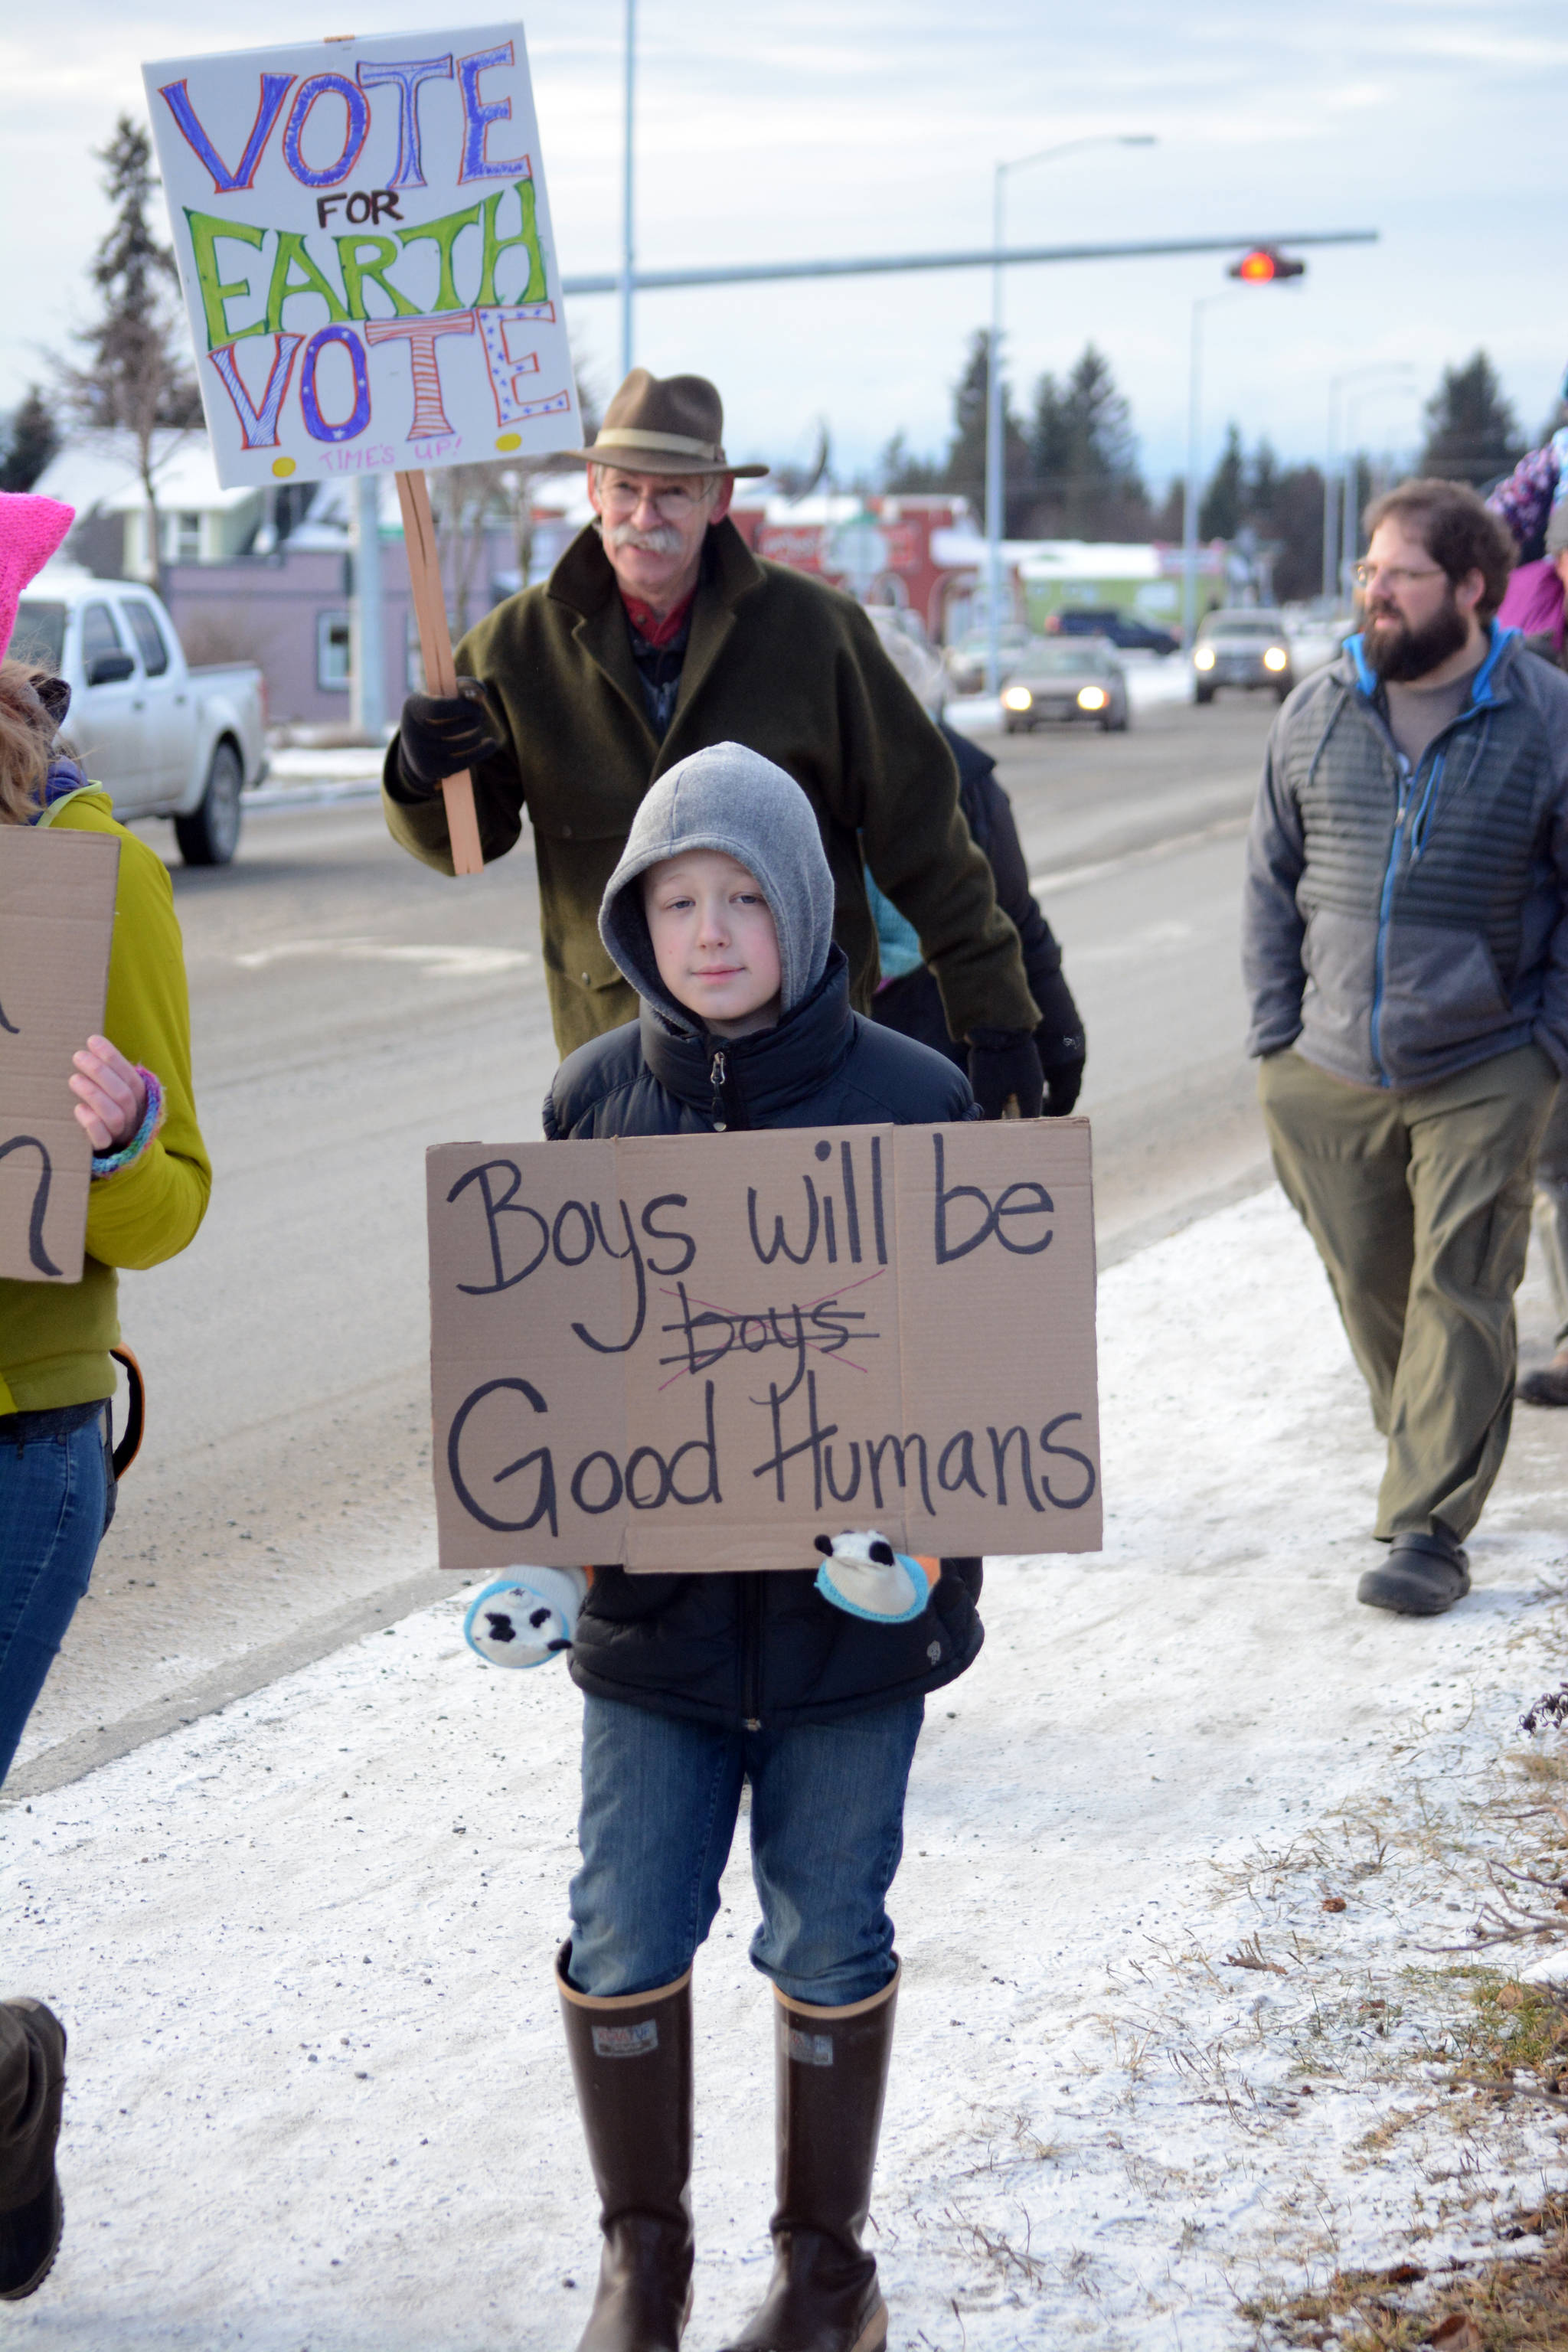 Elliott Greet, 11, walks in the Homer March for Women on Saturday. He said he marched for “equality between genders.” When asked how boys should treat girls, he said, “Be nice to them. Treat them how you would want to be treated.” (Photo by Michael Armstrong/Homer News)